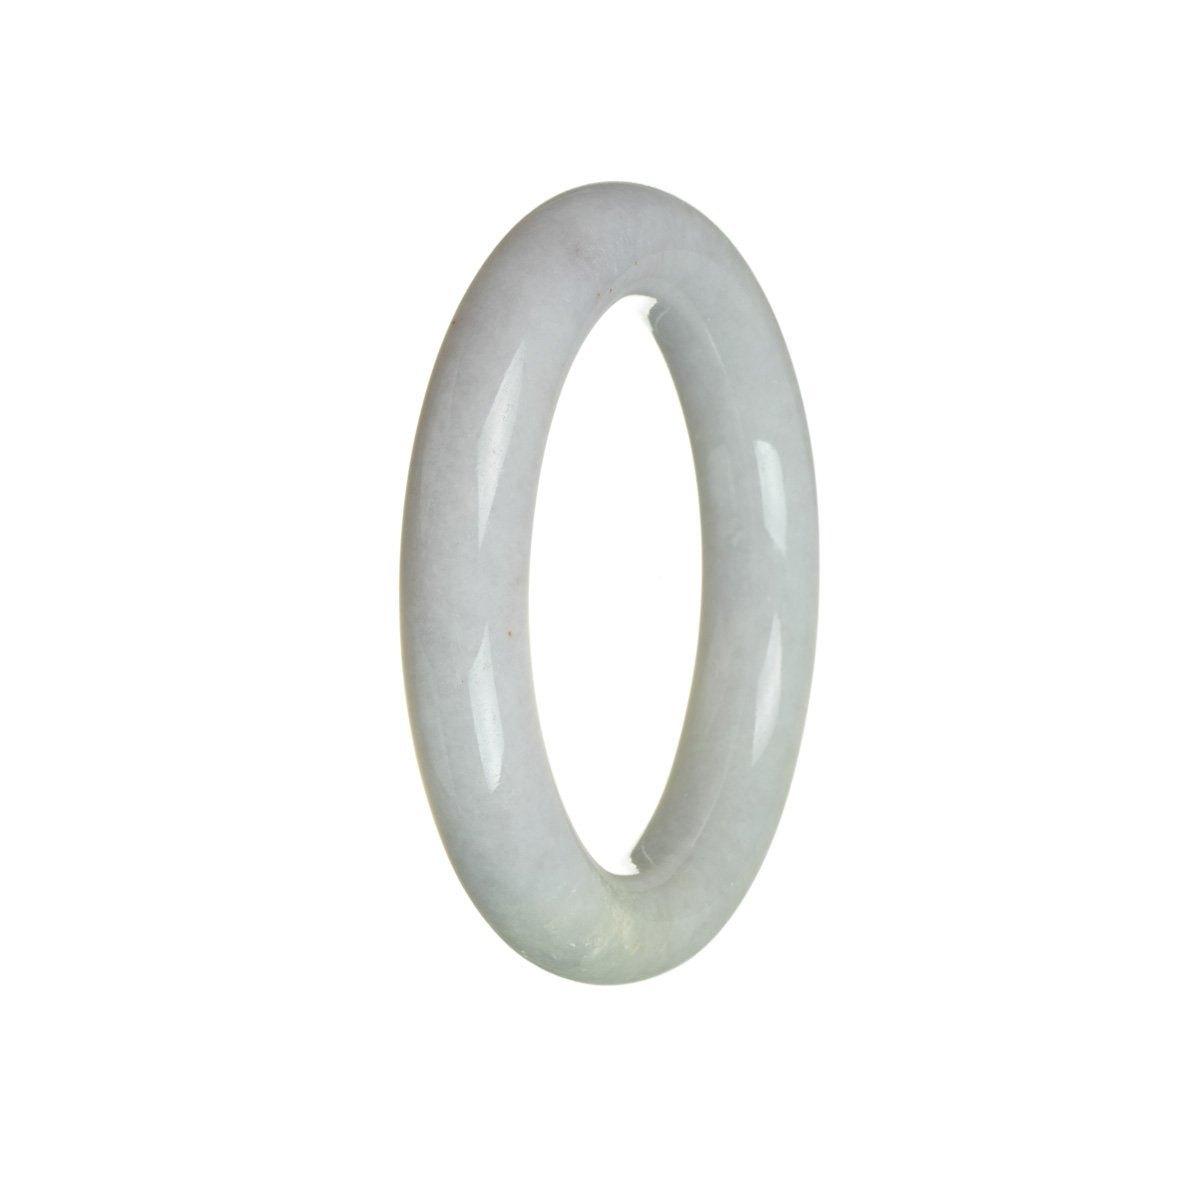 A close-up photo of a round lavender and pale green bracelet made with authentic Grade A Burmese jade. The bracelet measures 54mm in diameter and is sold by MAYS.